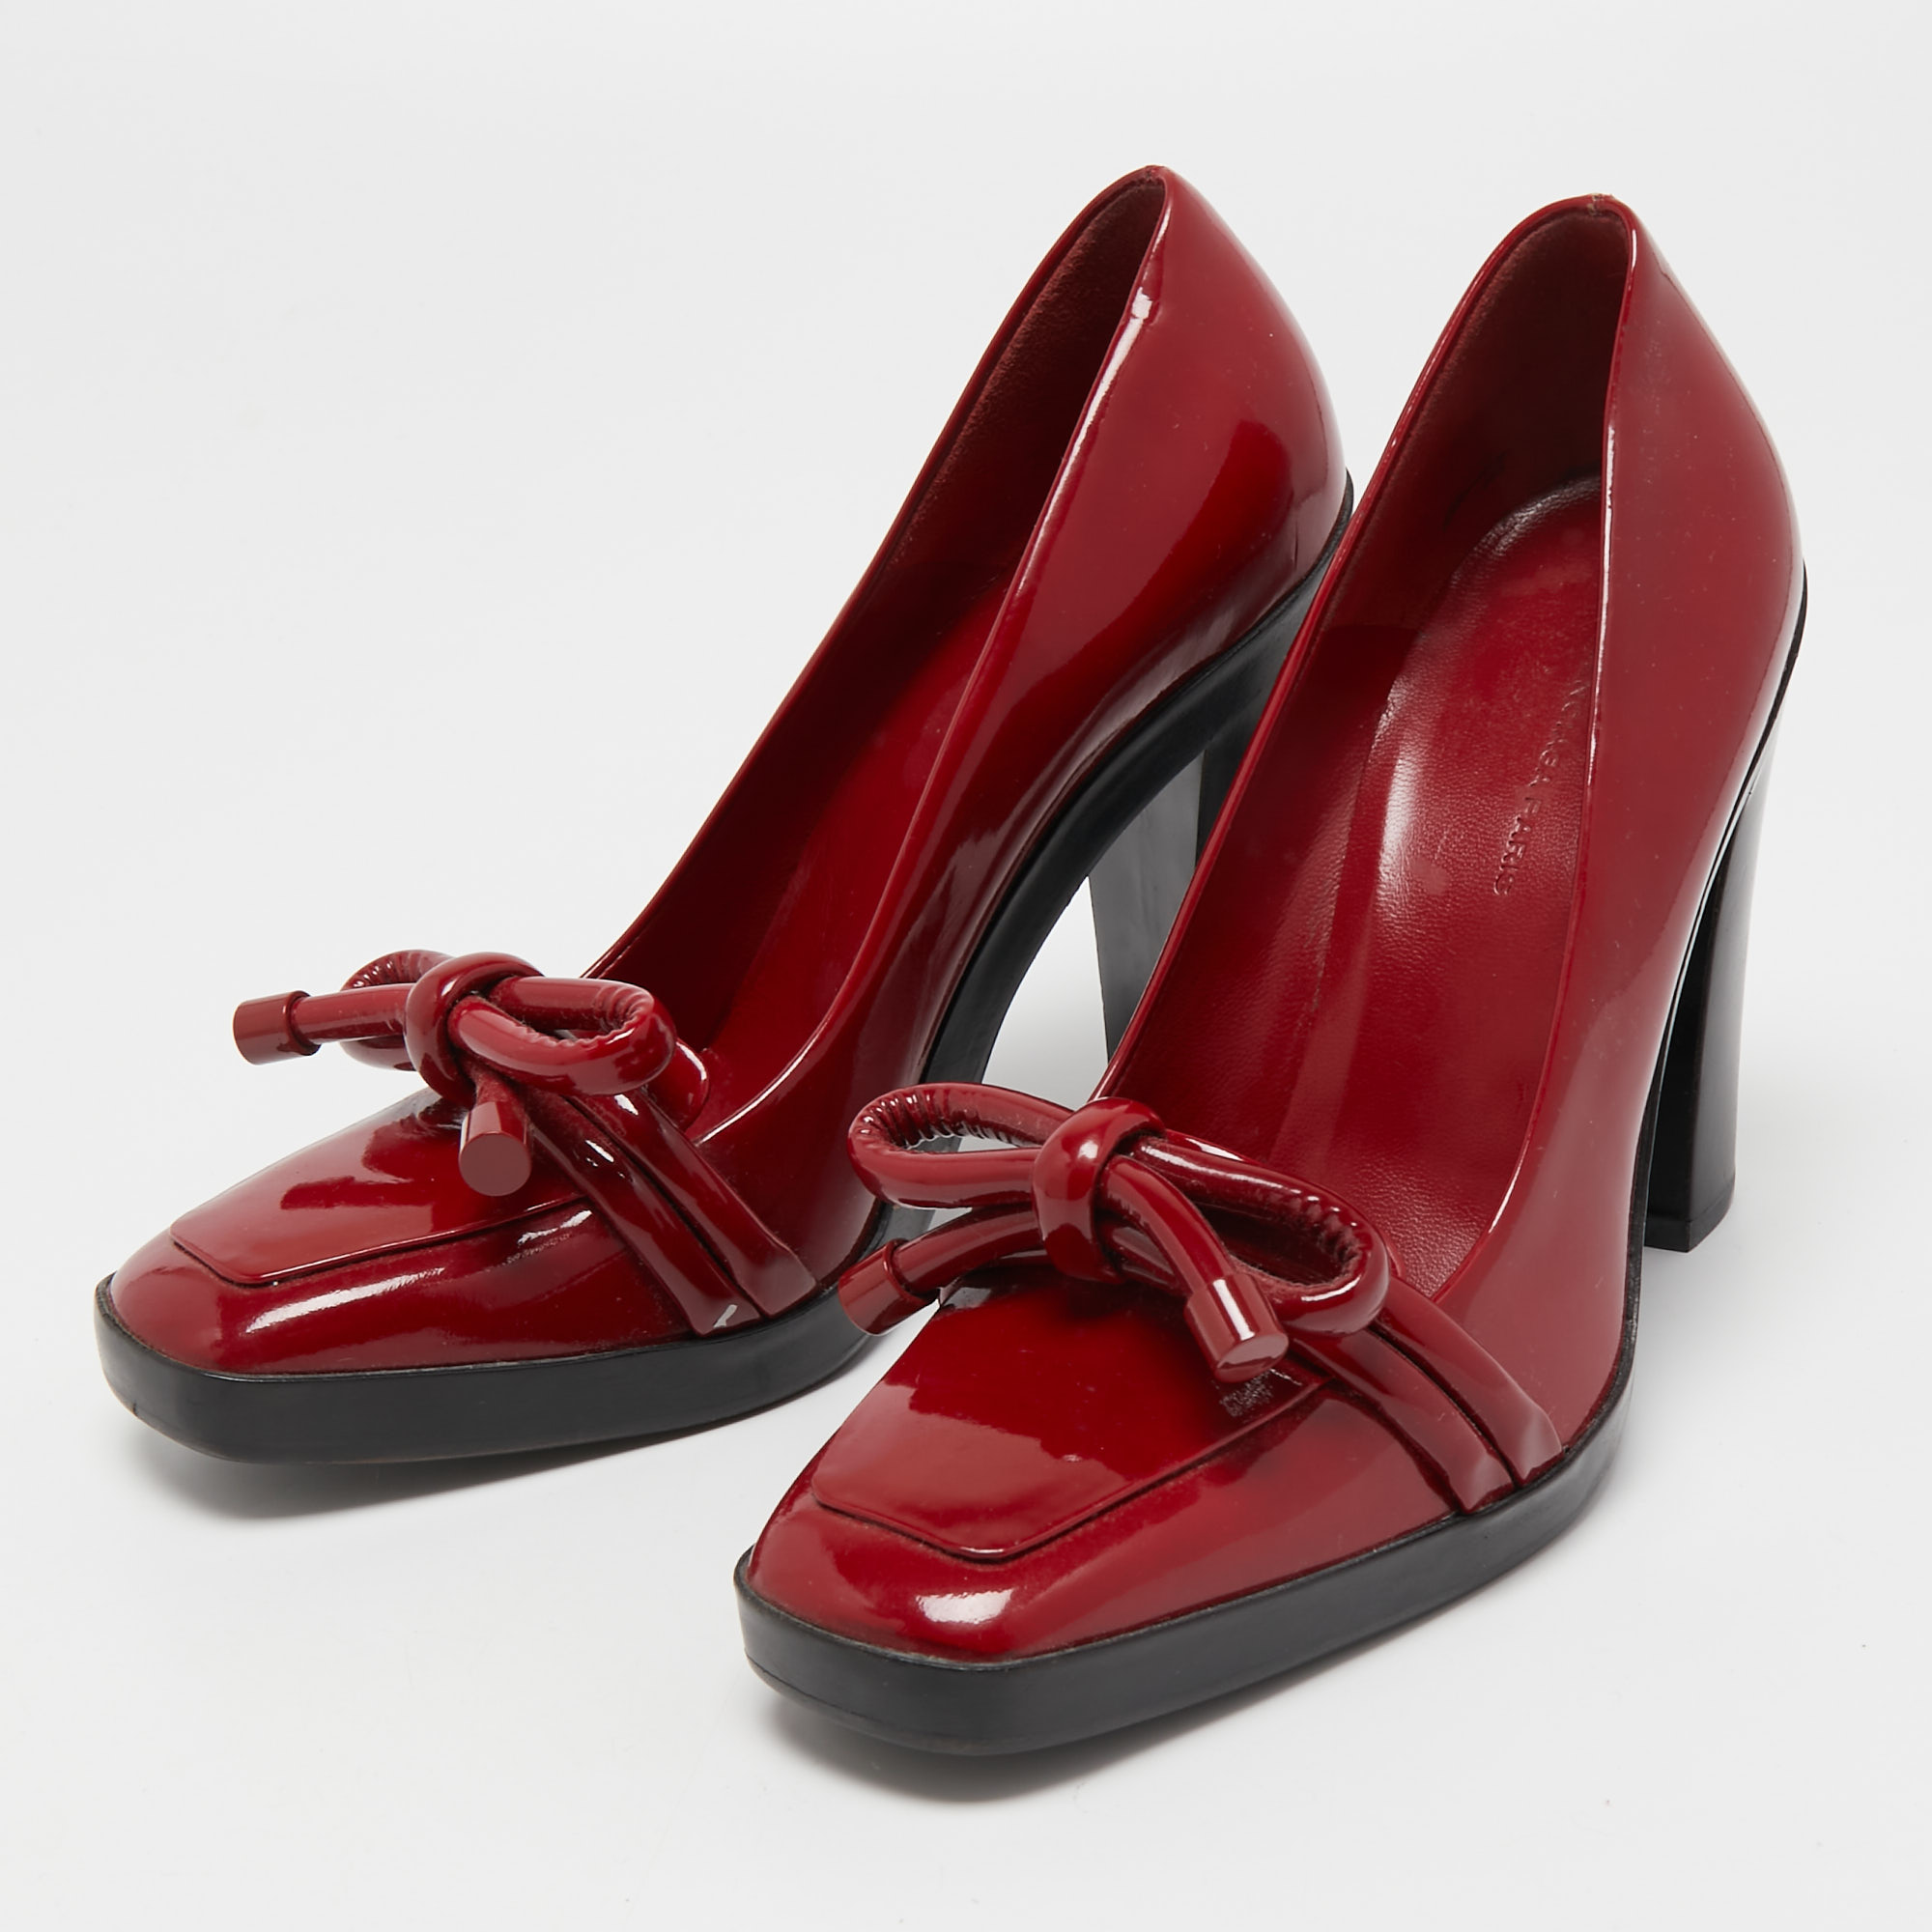 

Balenciaga Red Patent Leather Loafer Pumps Size